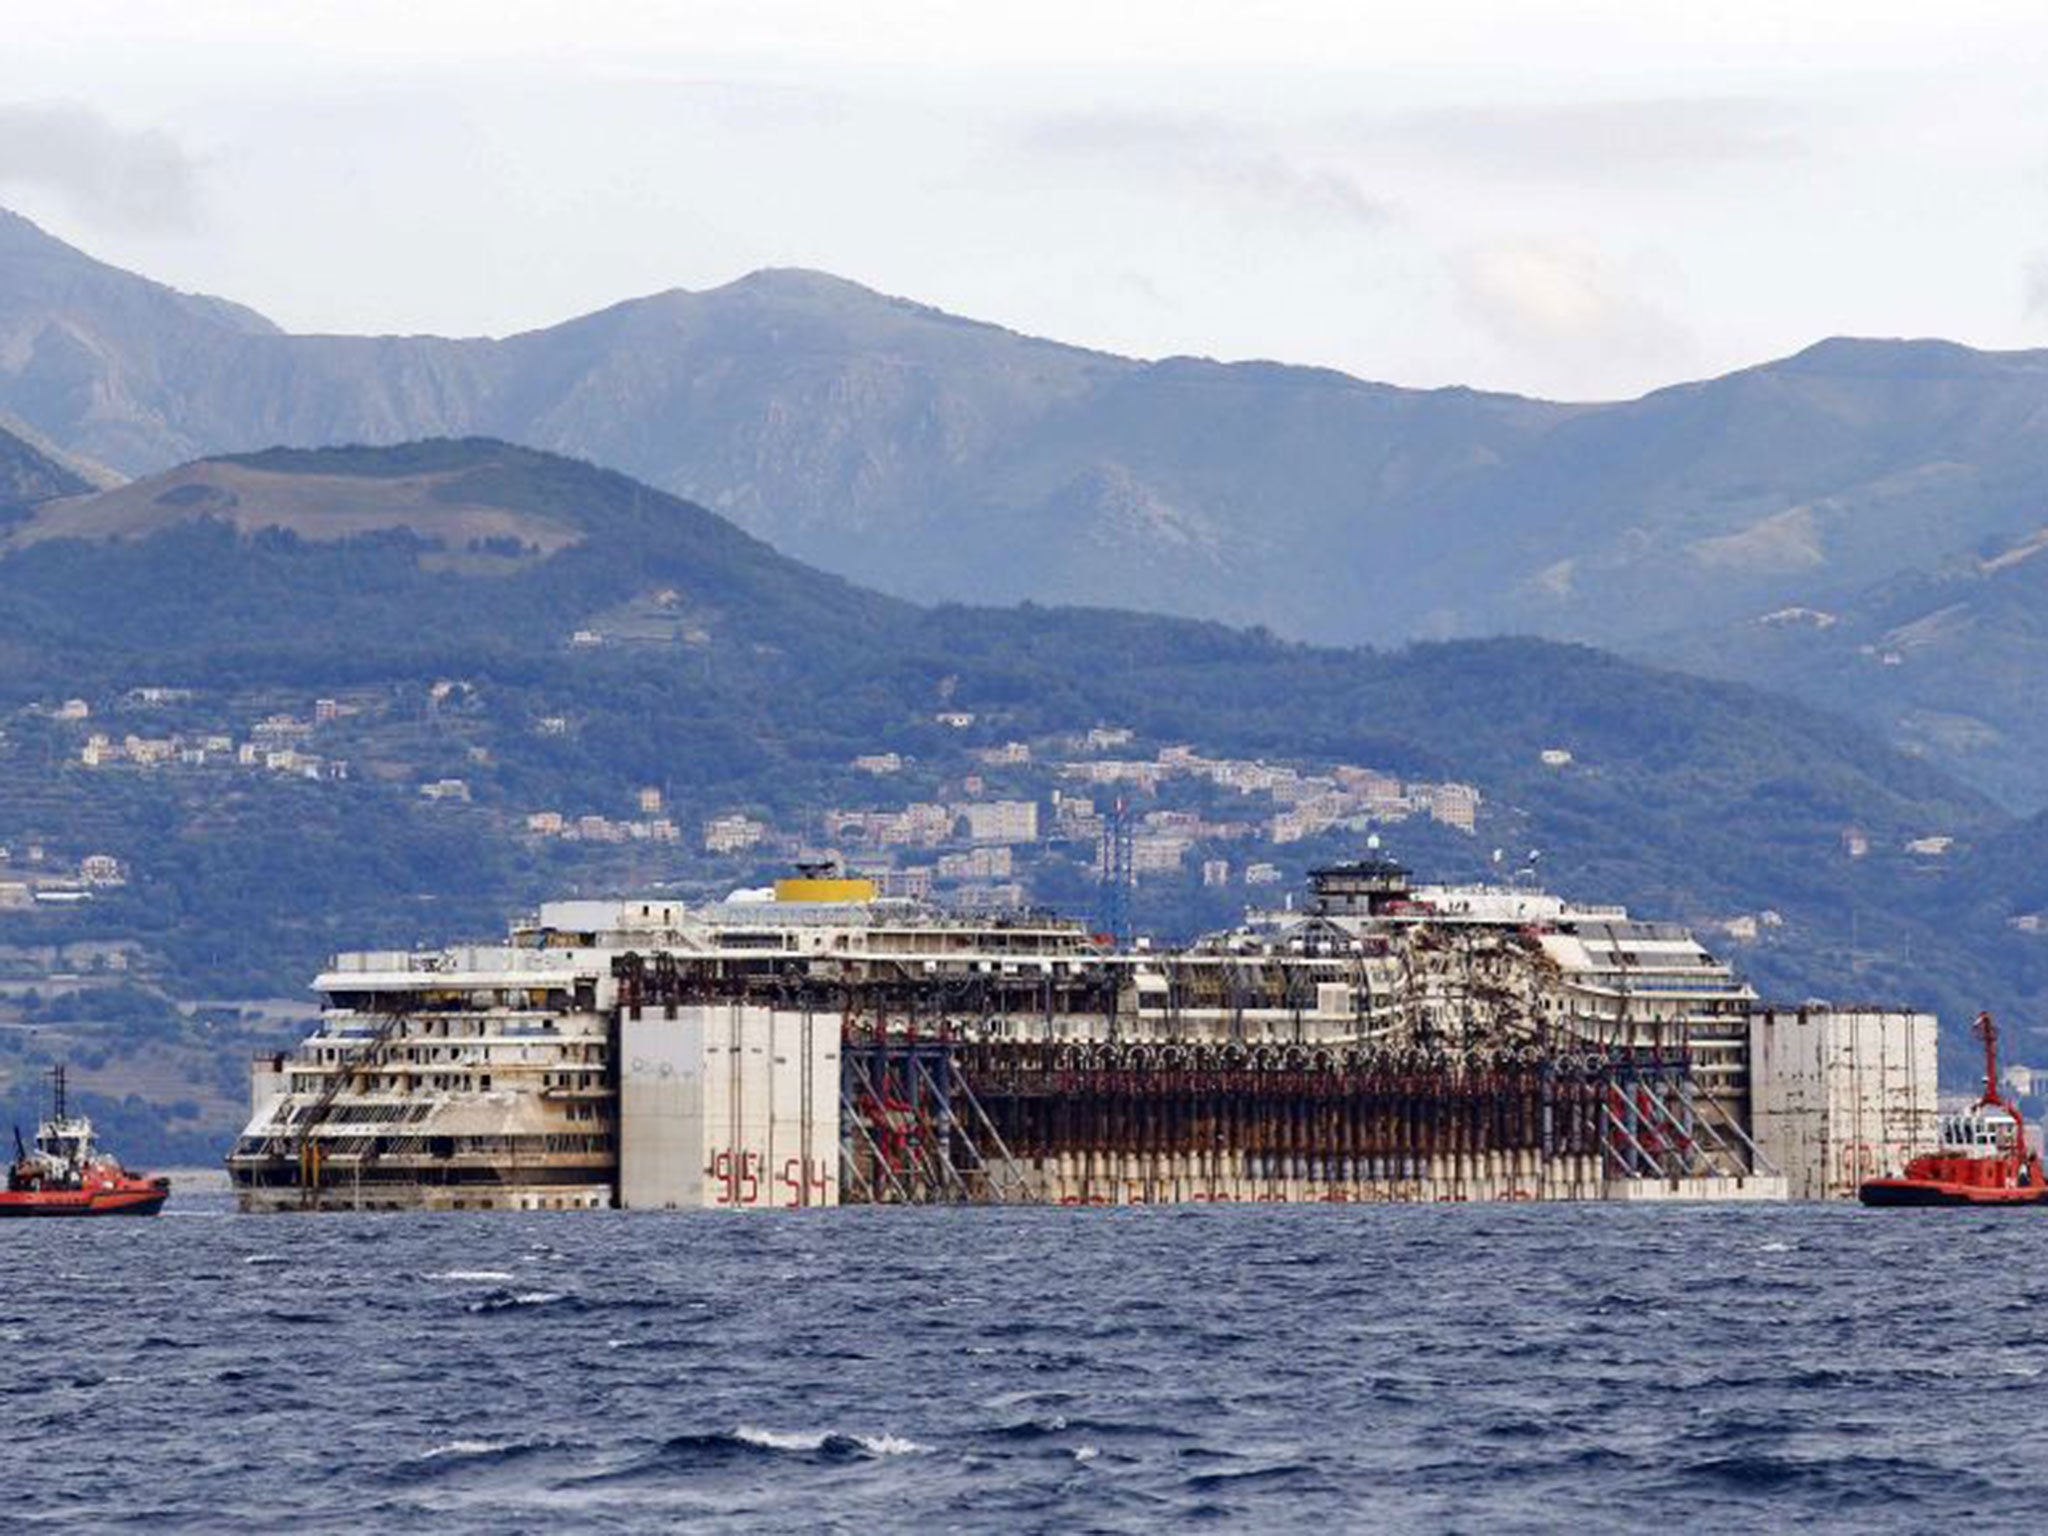 The Costa Concordia being towed into Genoa's port just nine years after it was launched to much fanfare in 2005